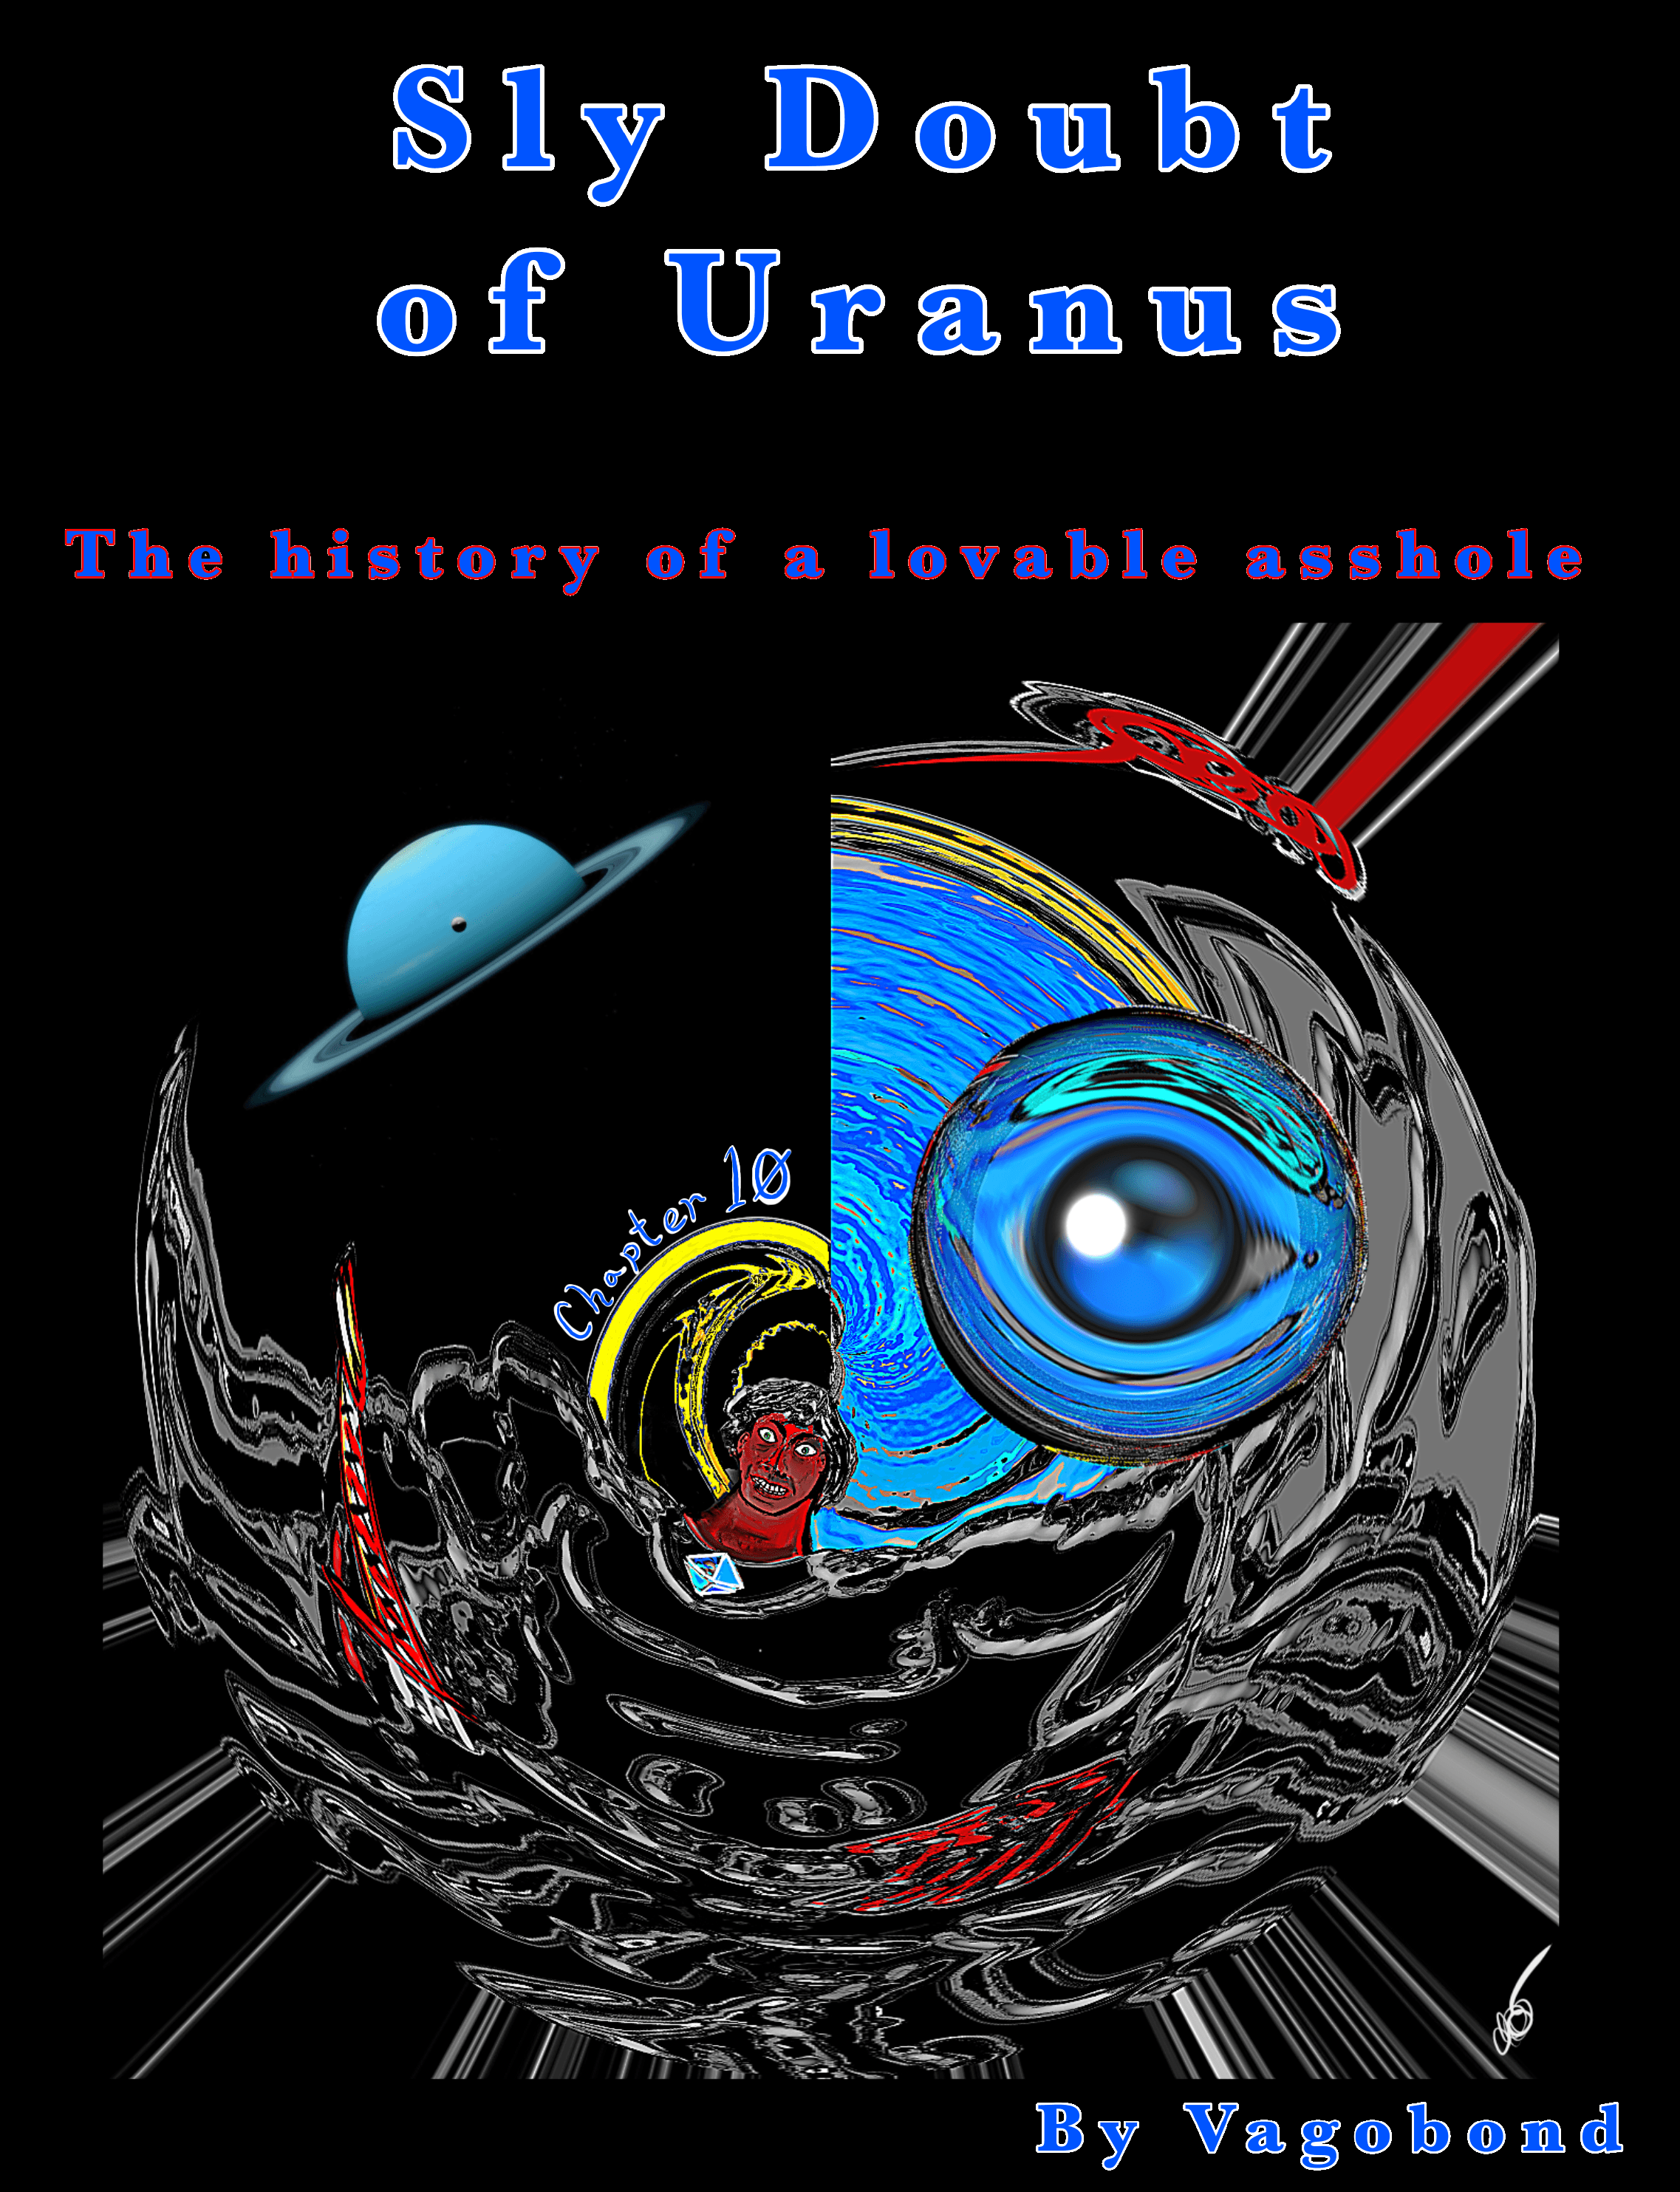 Sly Doubt of Uranus: The History of a Lovable Asshole - Chapter 10: 1st Edition